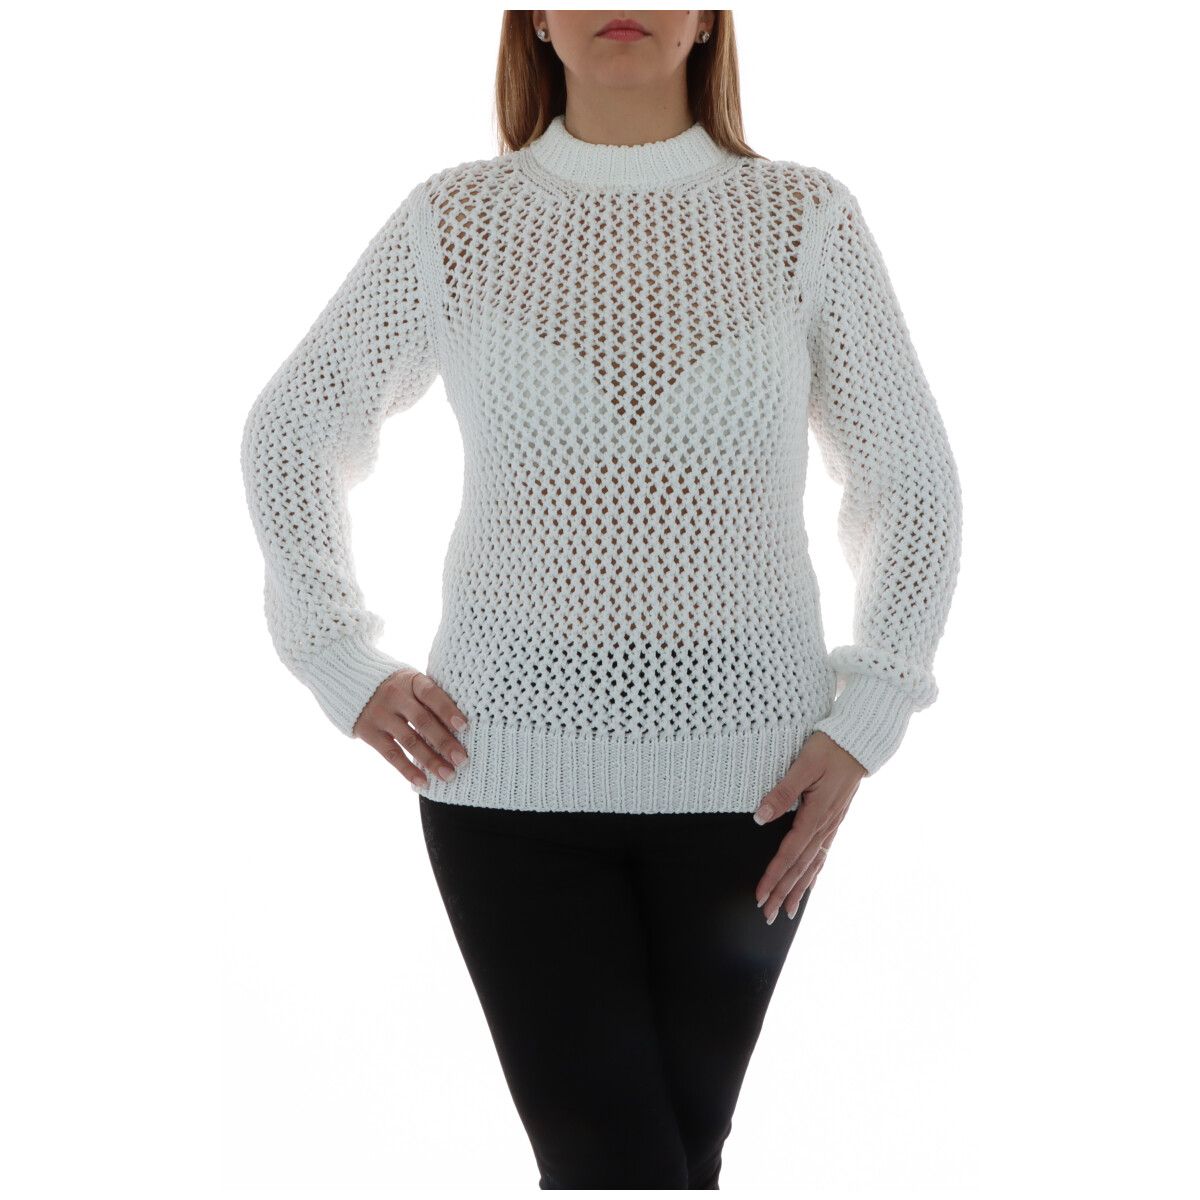 Brand: Calvin Klein
Gender: Women
Type: Knitwear
Season: All seasons

PRODUCT DETAIL
• Color: white
• Sleeves: long
• Neckline: round neck
•  Article code: K20K200625108

COMPOSITION AND MATERIAL
• Composition: -100% polyester 
•  Washing: handwash